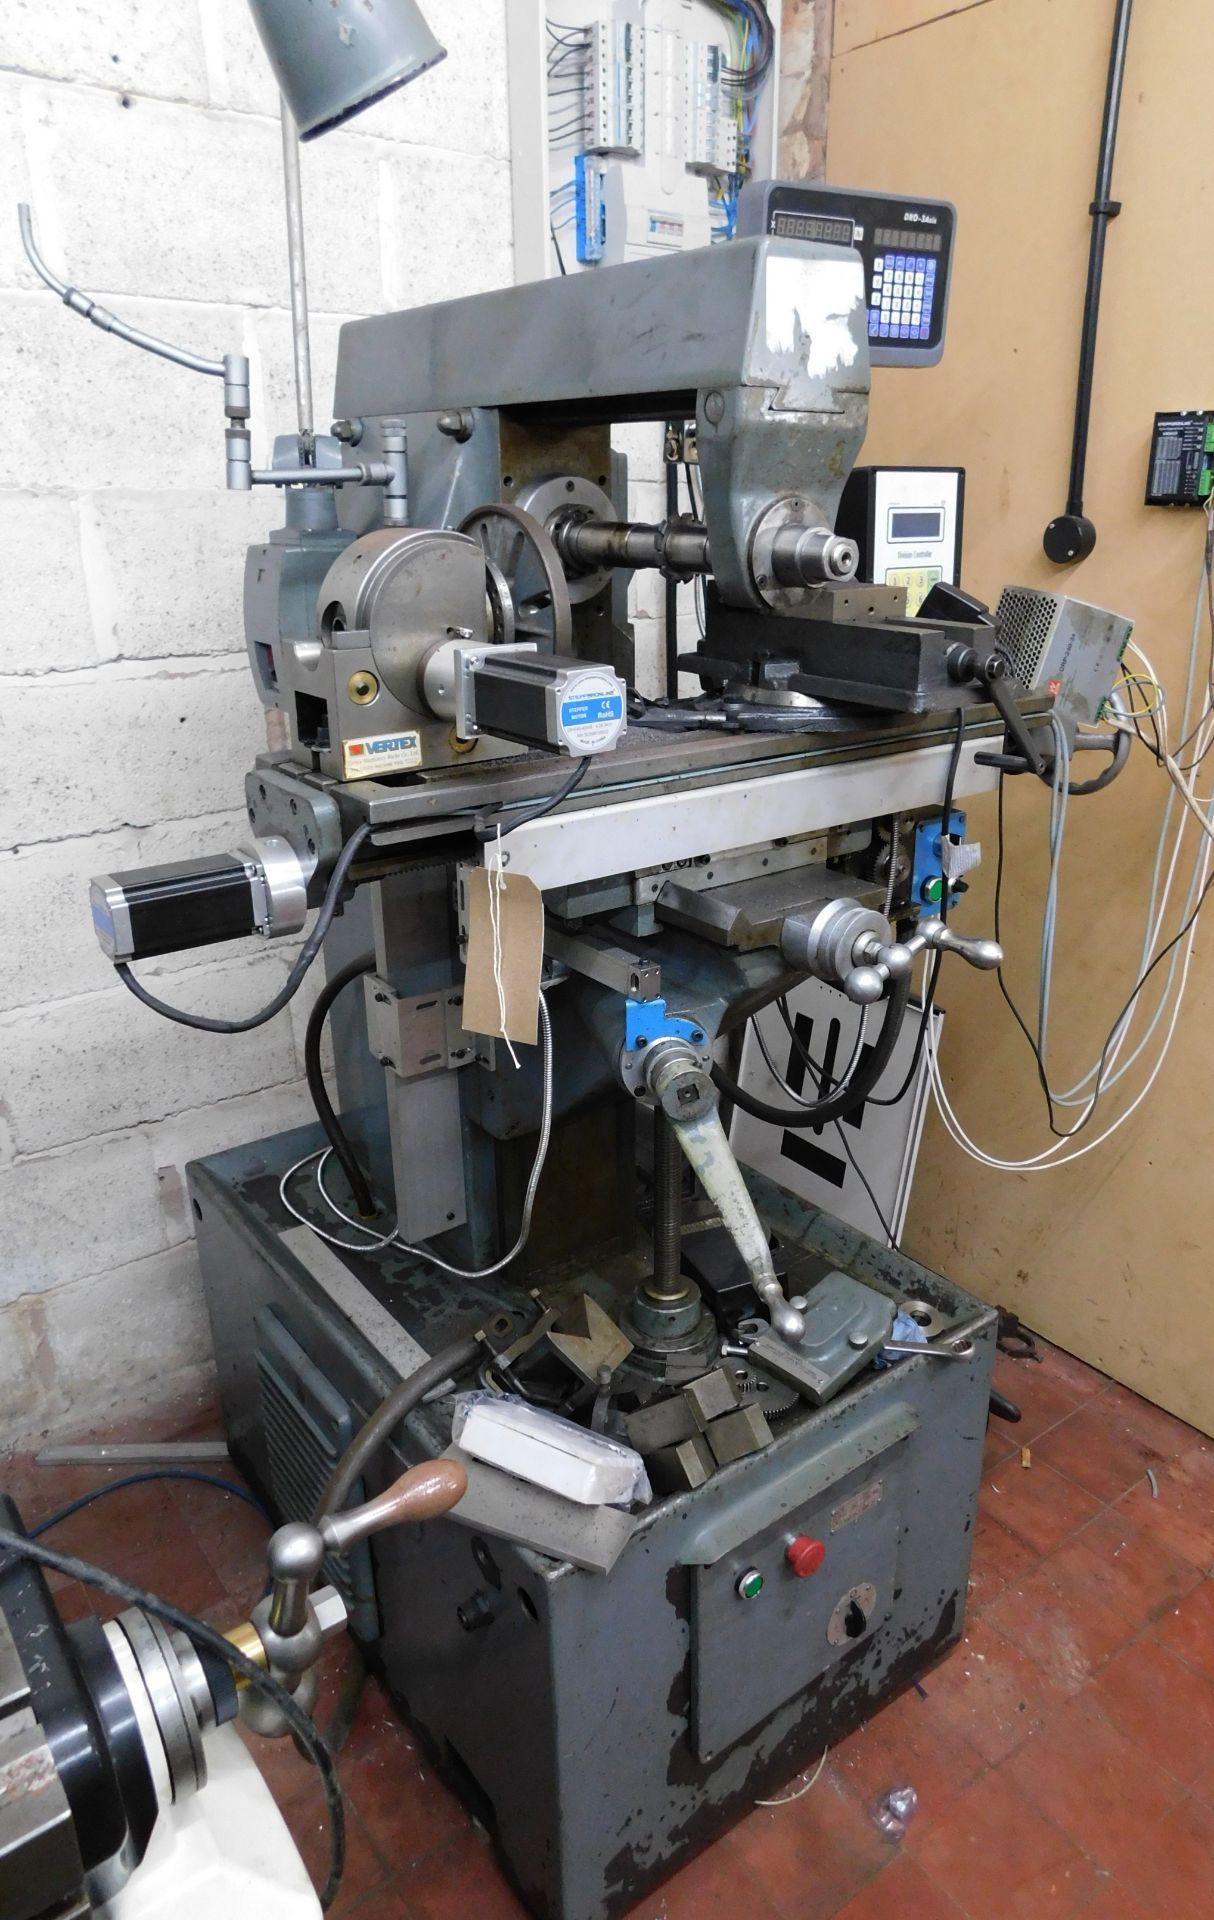 Harrison 600 Surface Grinder with DRO-3 Axis Controller, Serial Number 149041 (Location: Bolton.